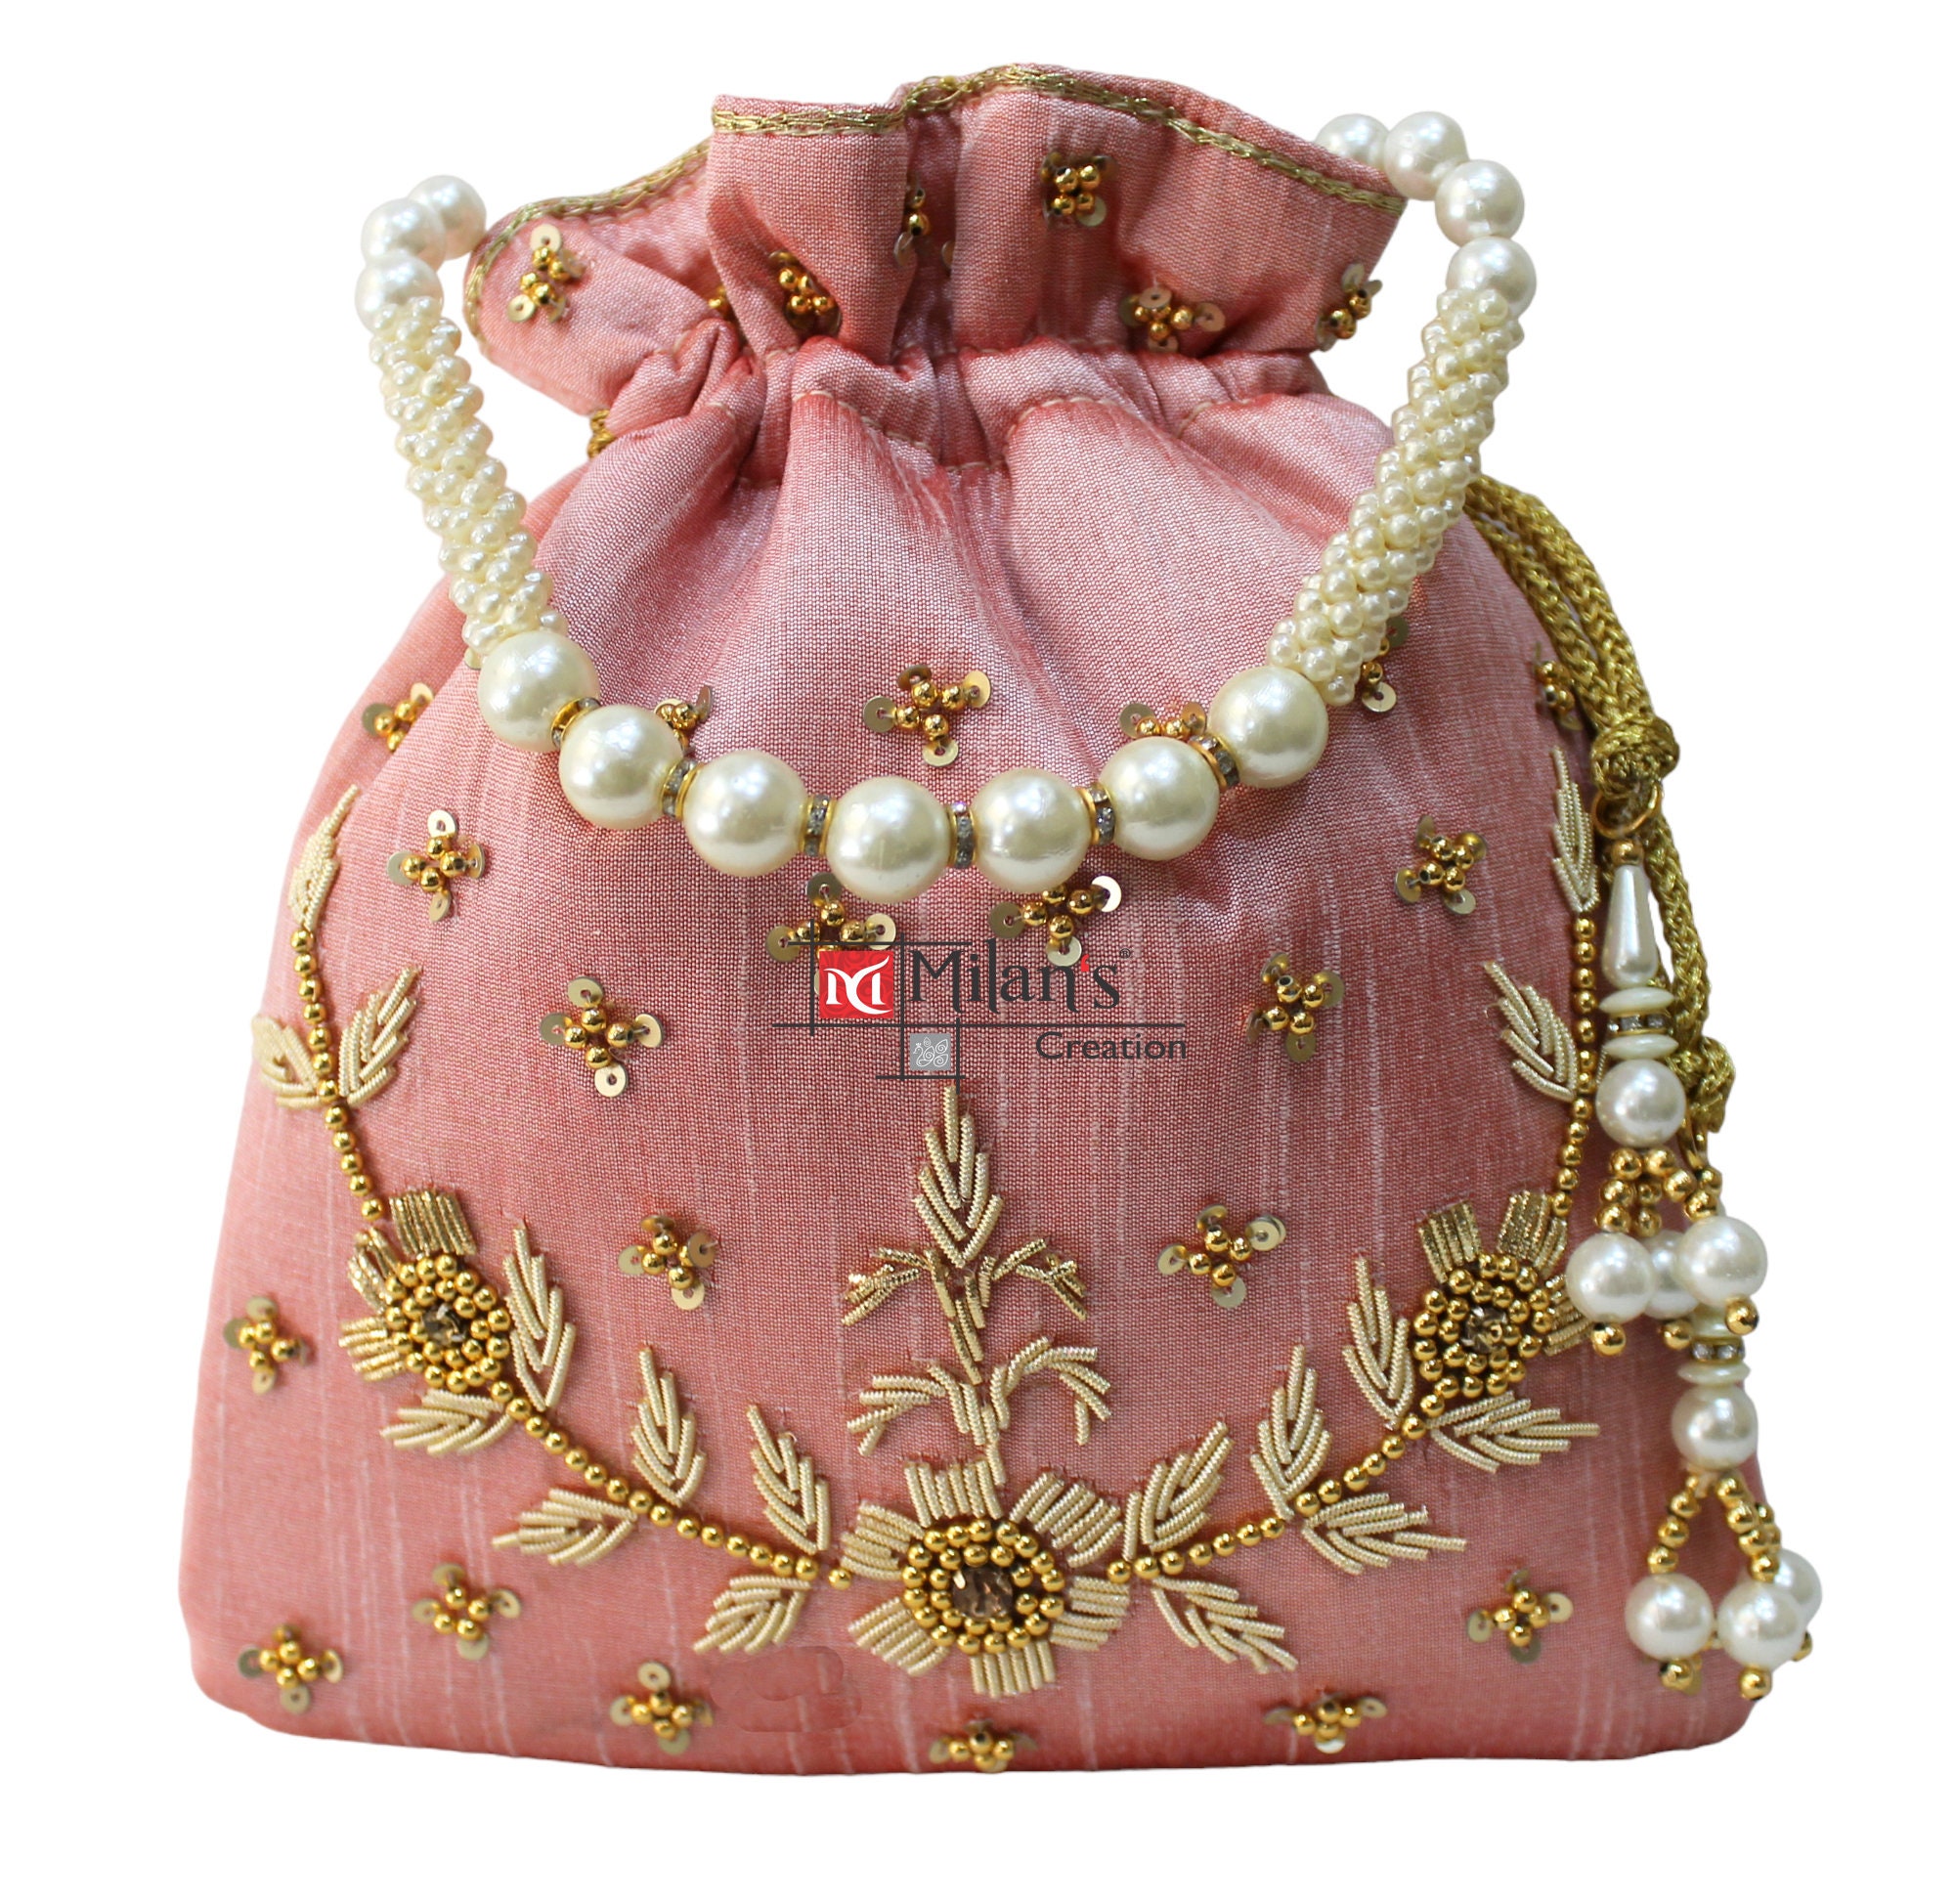 Mini Sling Bag for Baby Girls Cute Pouch Potli Bag with Cross Body Chain